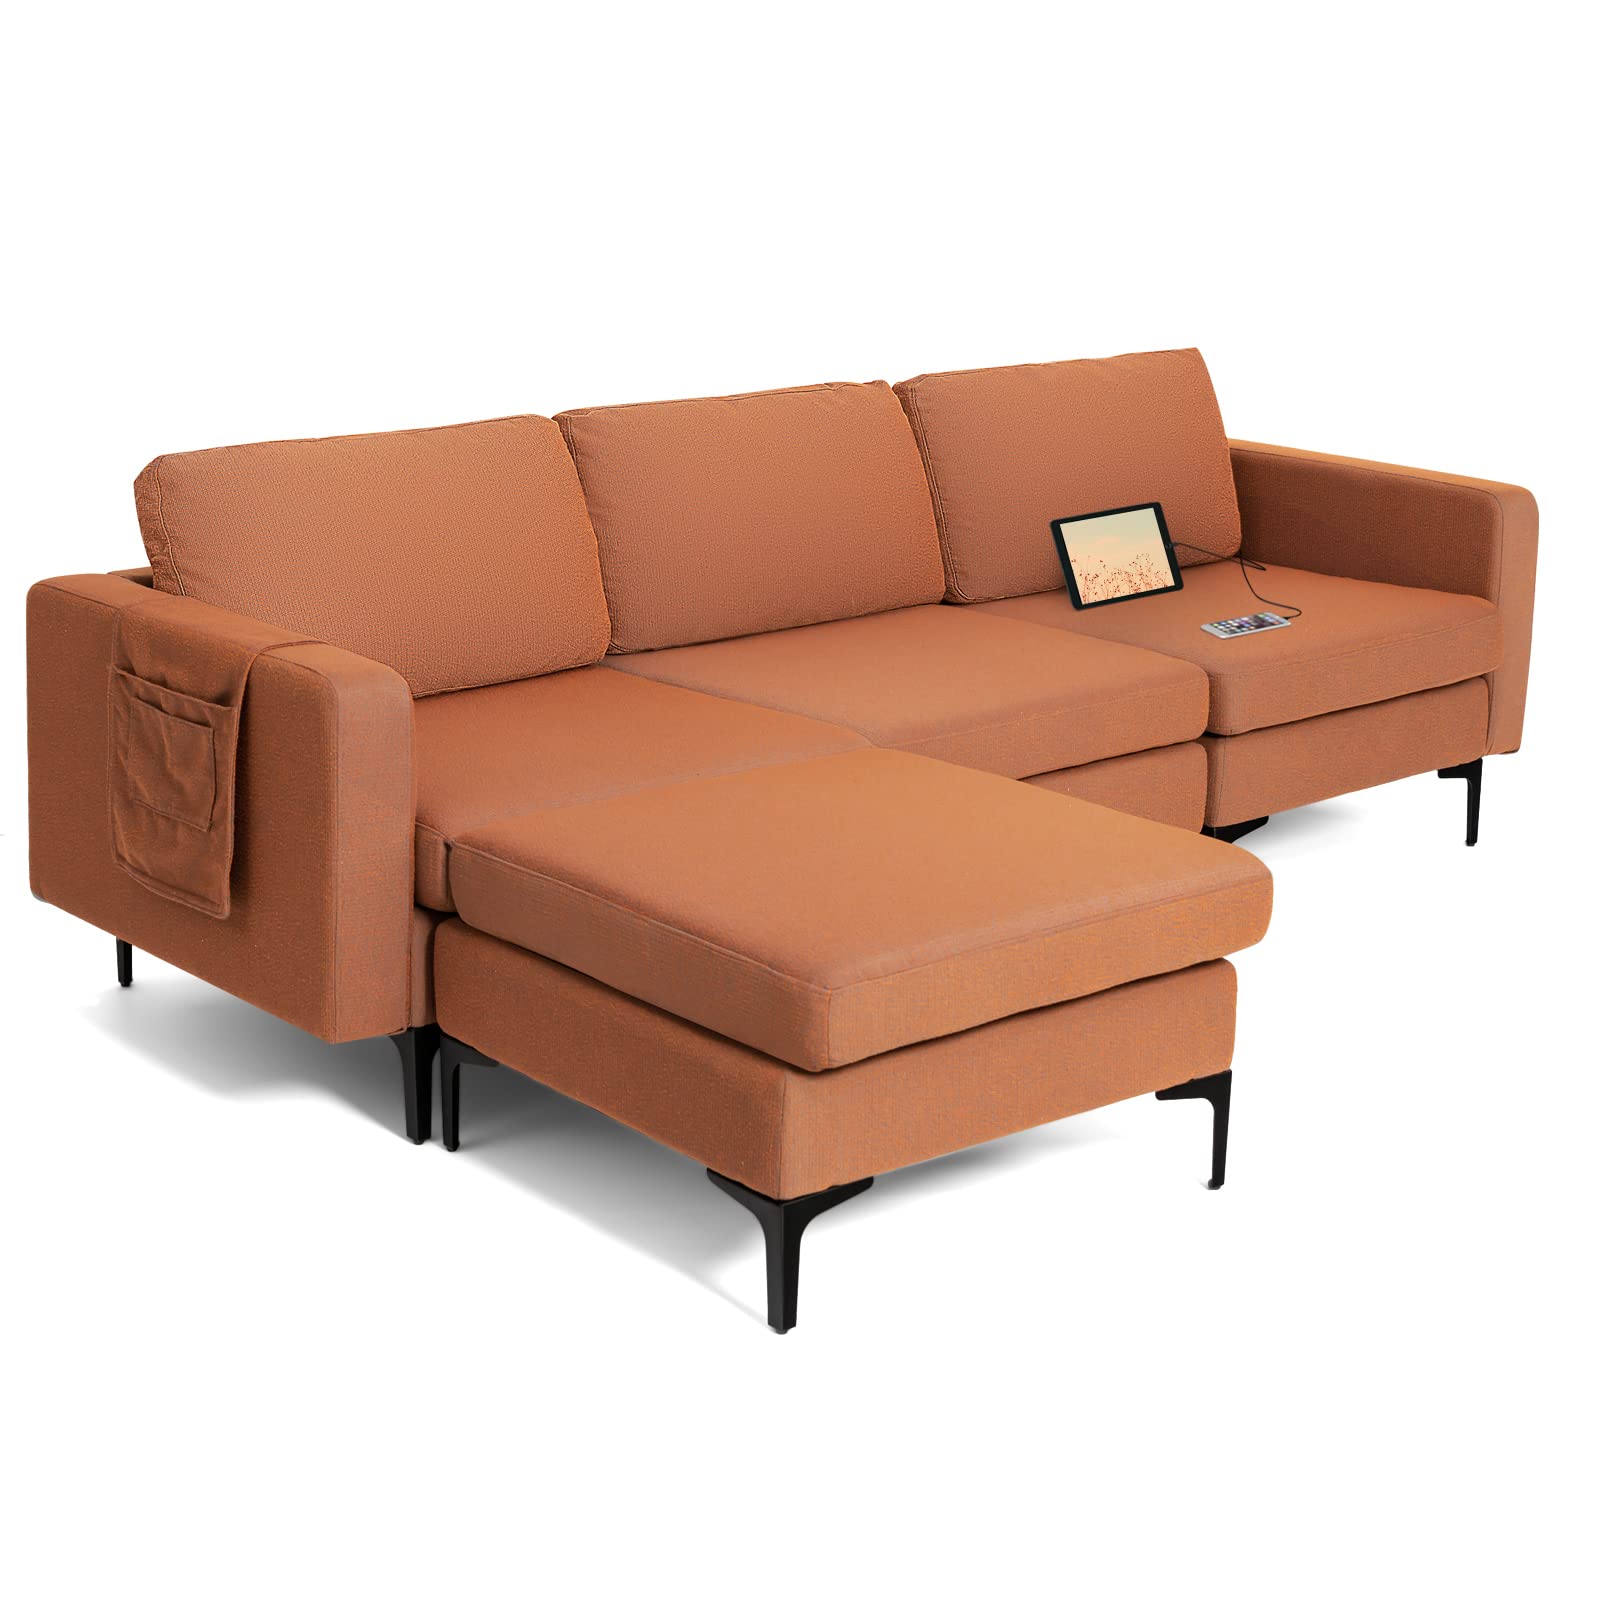 Giantex 94.5" L Convertible Sofa Couch, 3 Seat Sectional Sleeper with USB Ports & Socket